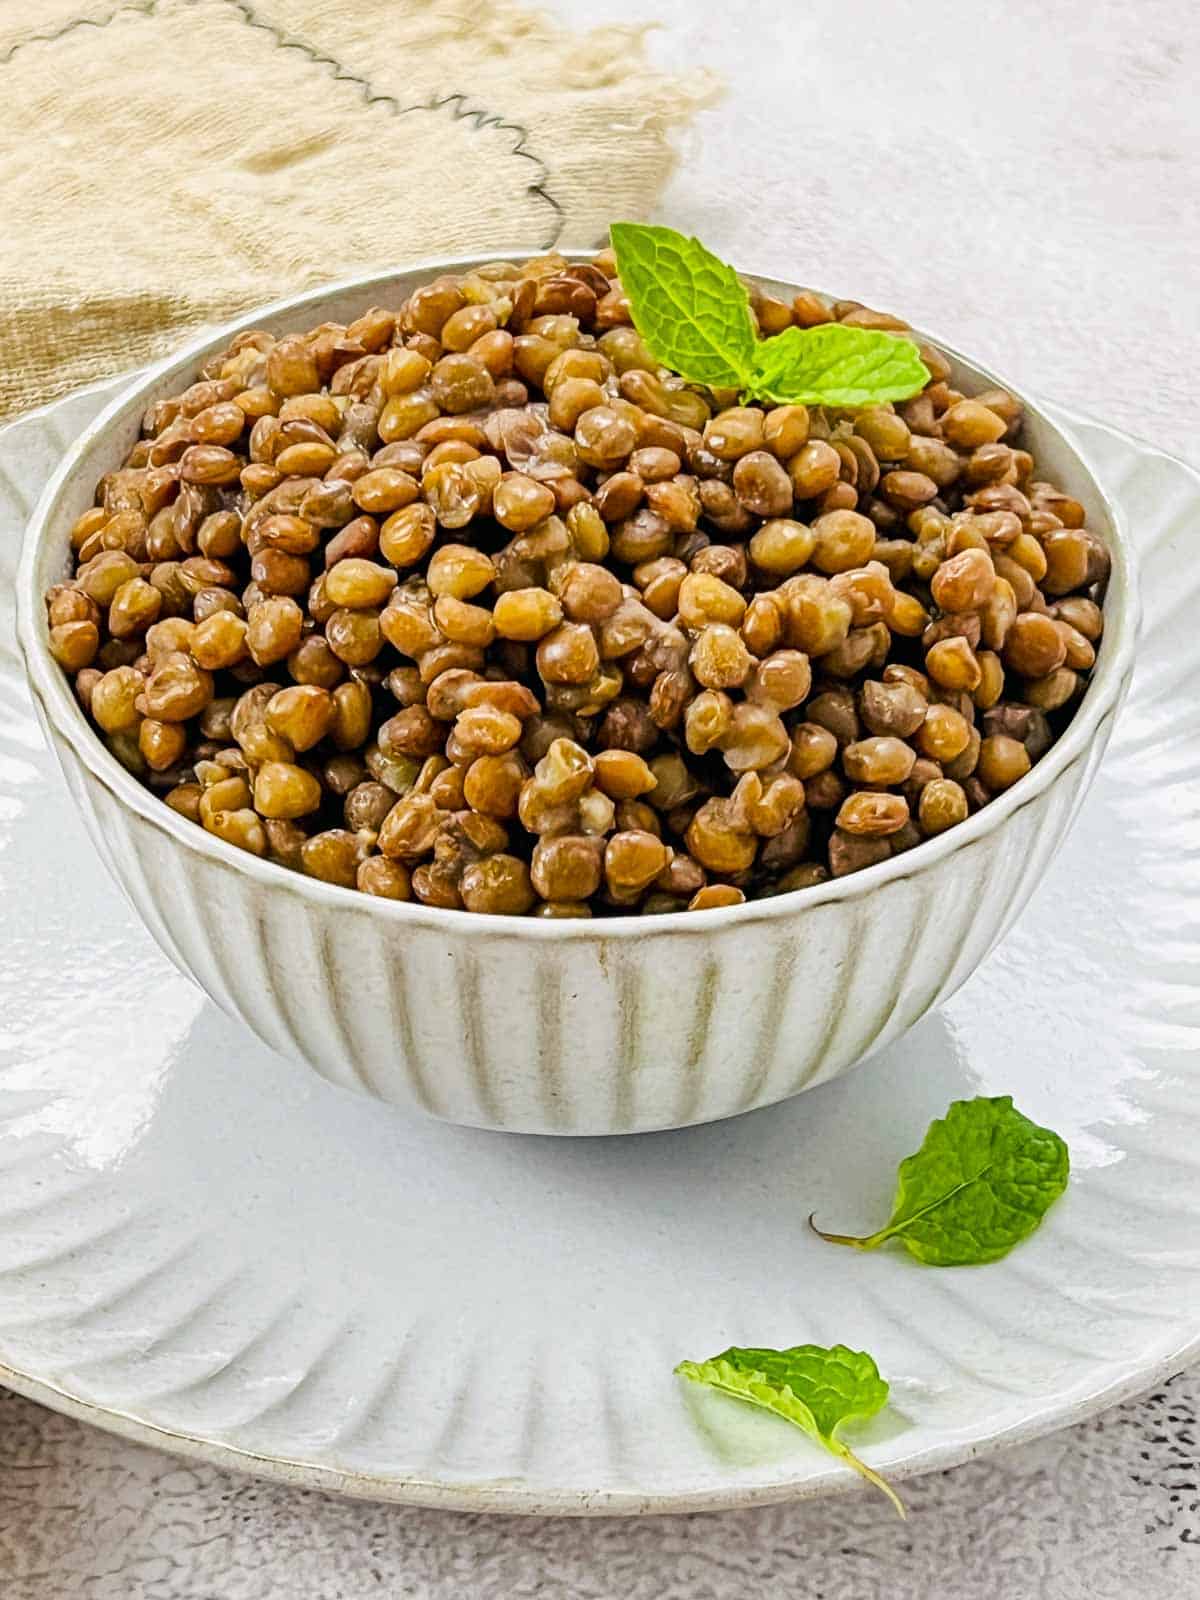 Cooked brown lentils in a white bowl with mint leaves in the background.